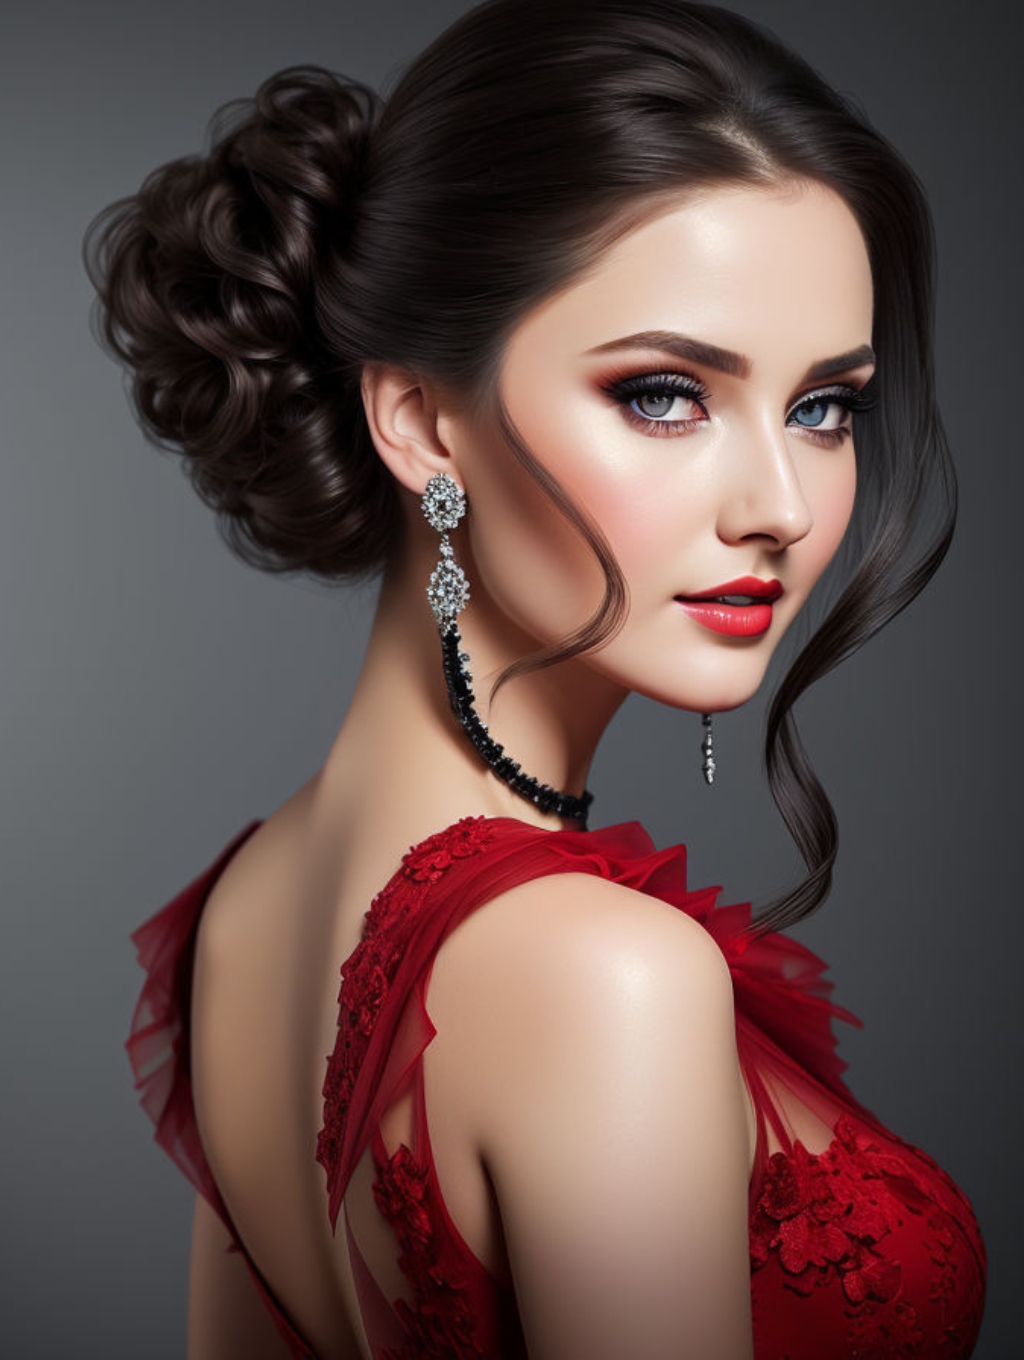 Glamorous Occasions: Profile Pictures & Art Portraits-Theme:6